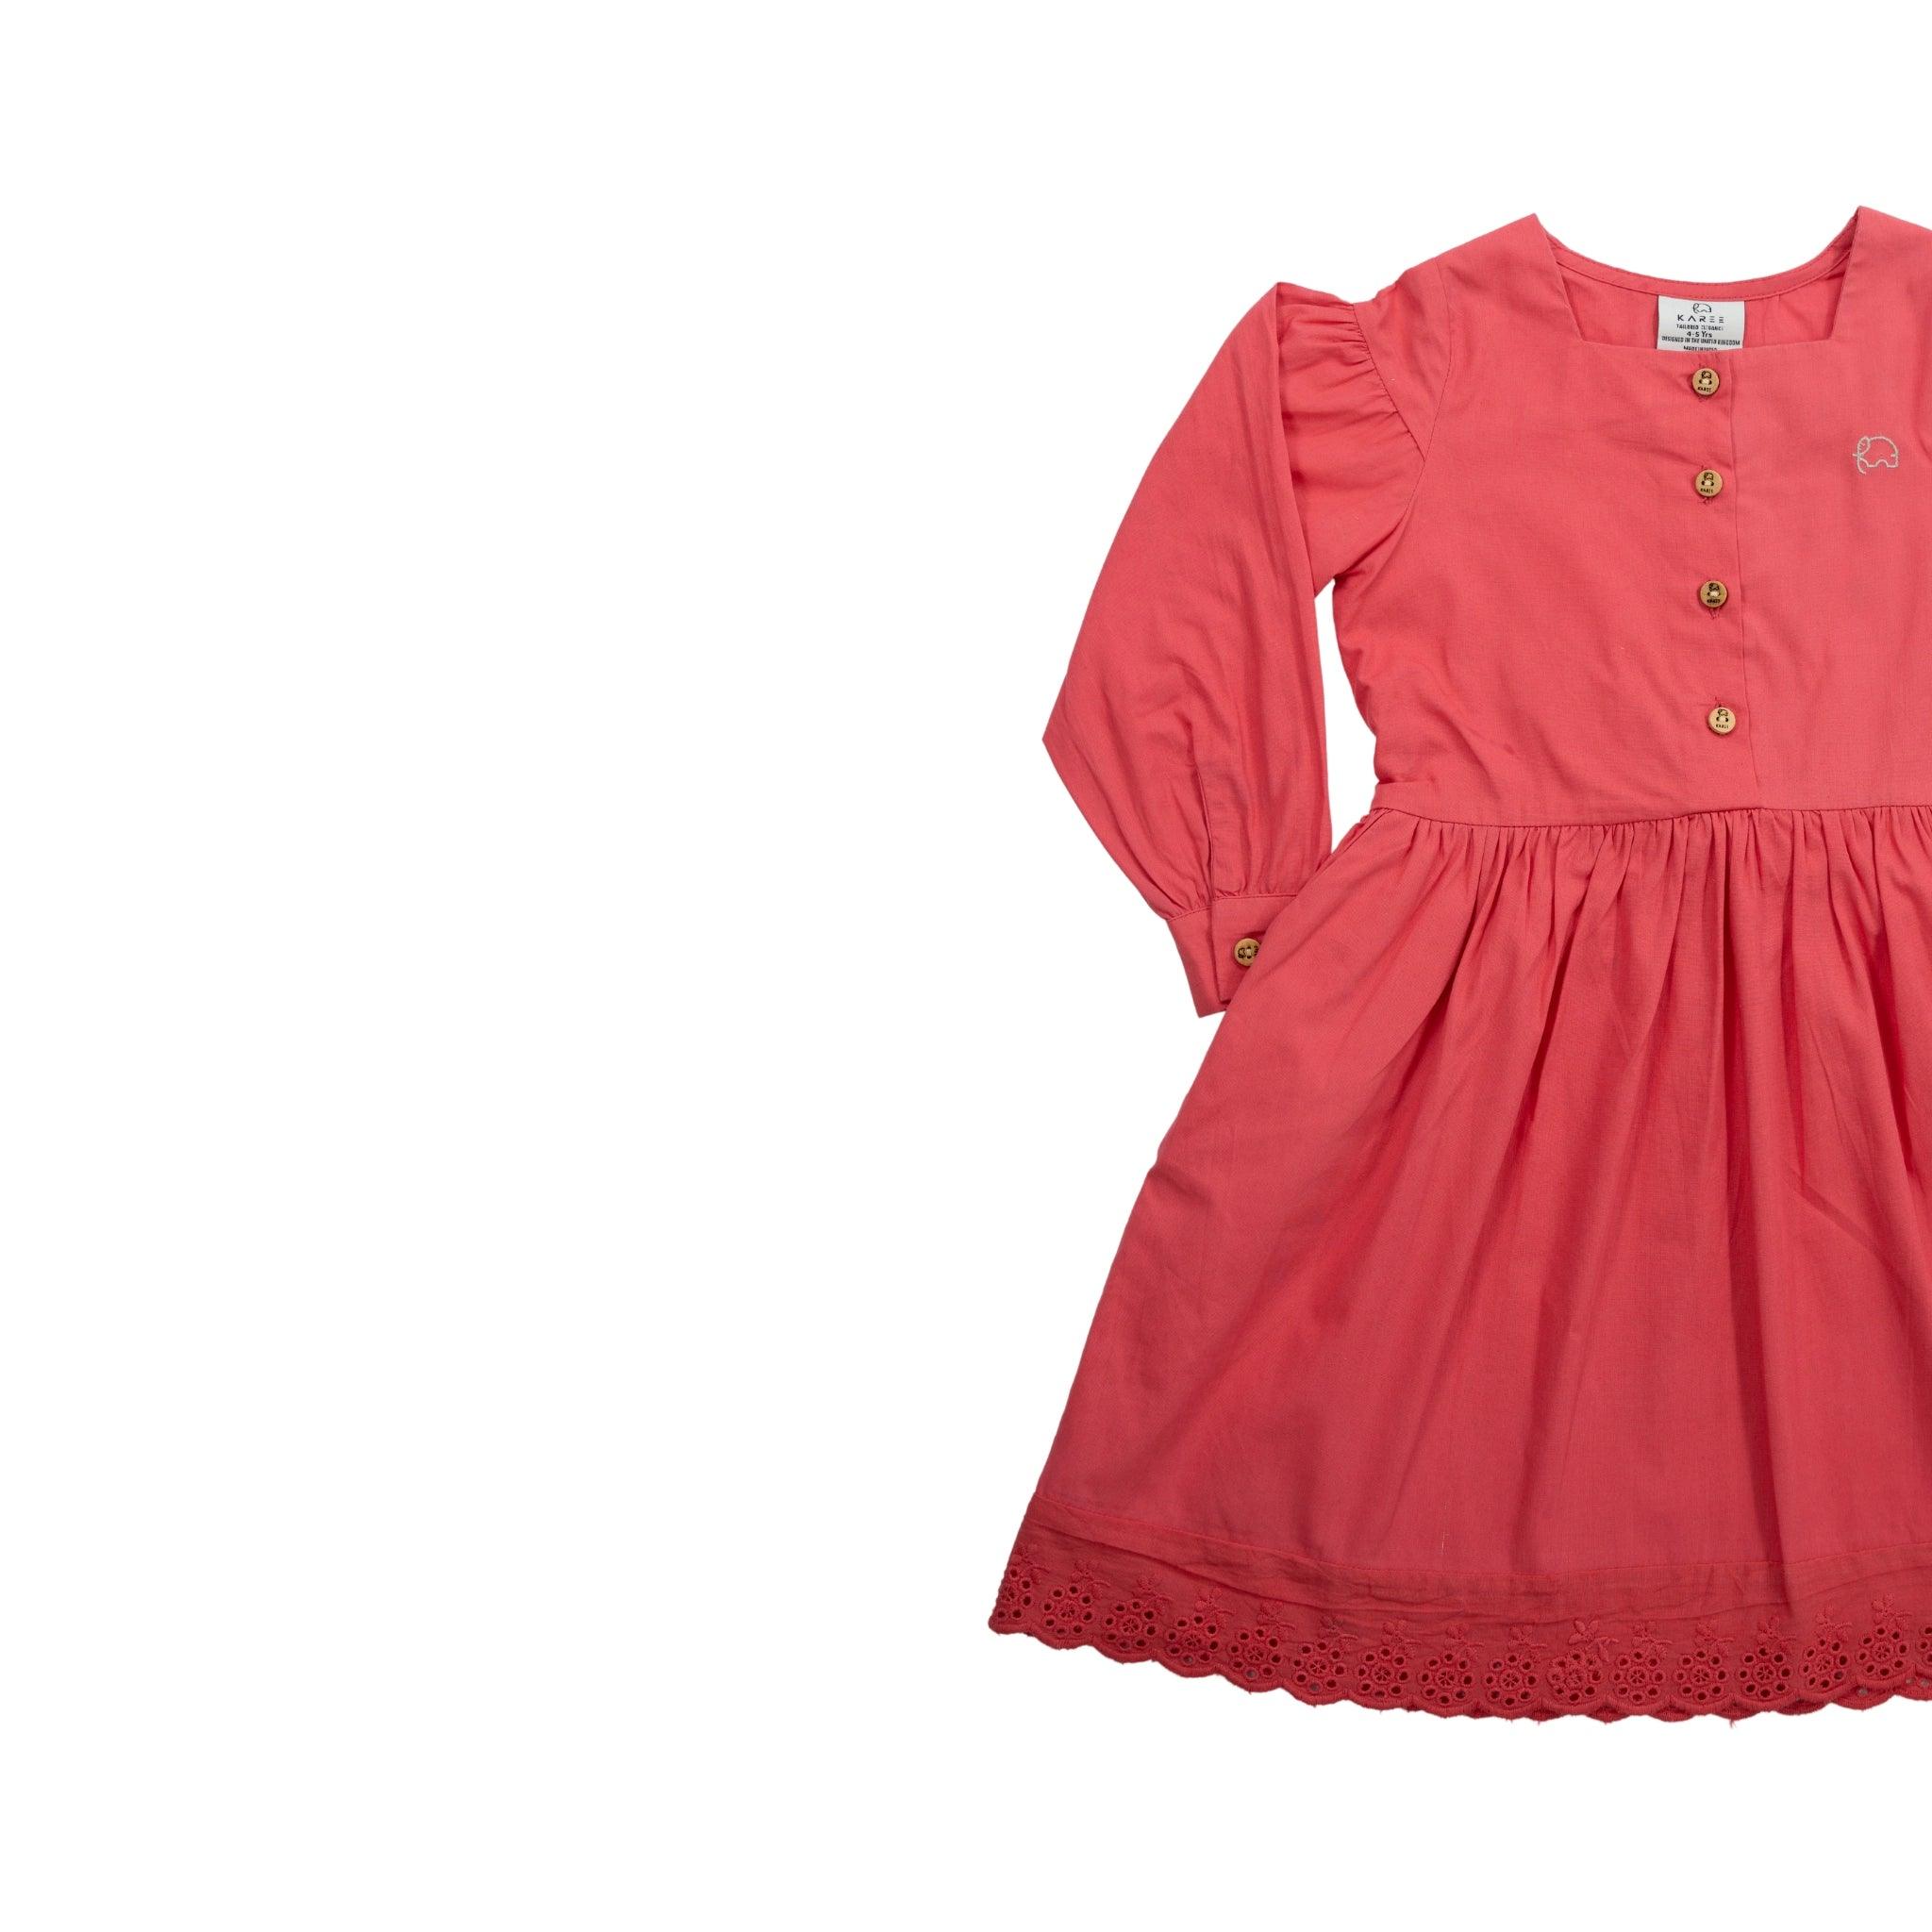 Coral-colored toddler dress with long puff sleeves, round neckline, button-up front, and lace trim, isolated on a white background. would be replaced with Red Long Puff Sleeve Cotton Dress from Karee.